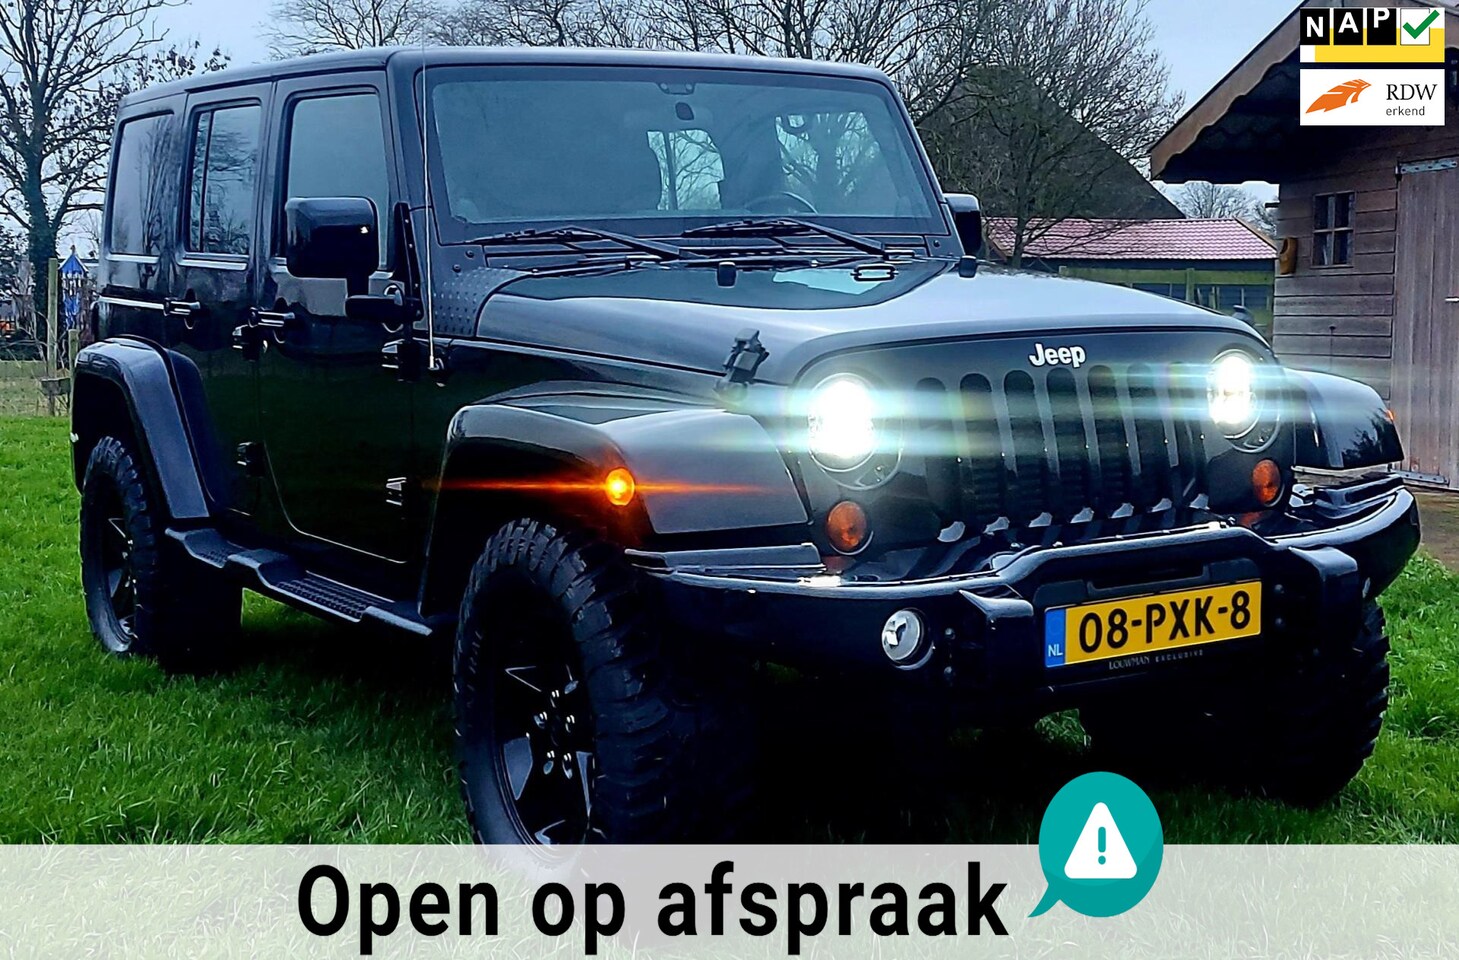 bijtend Tirannie Frustrerend jeep wrangler diesel en used – Search for your used car on the parking